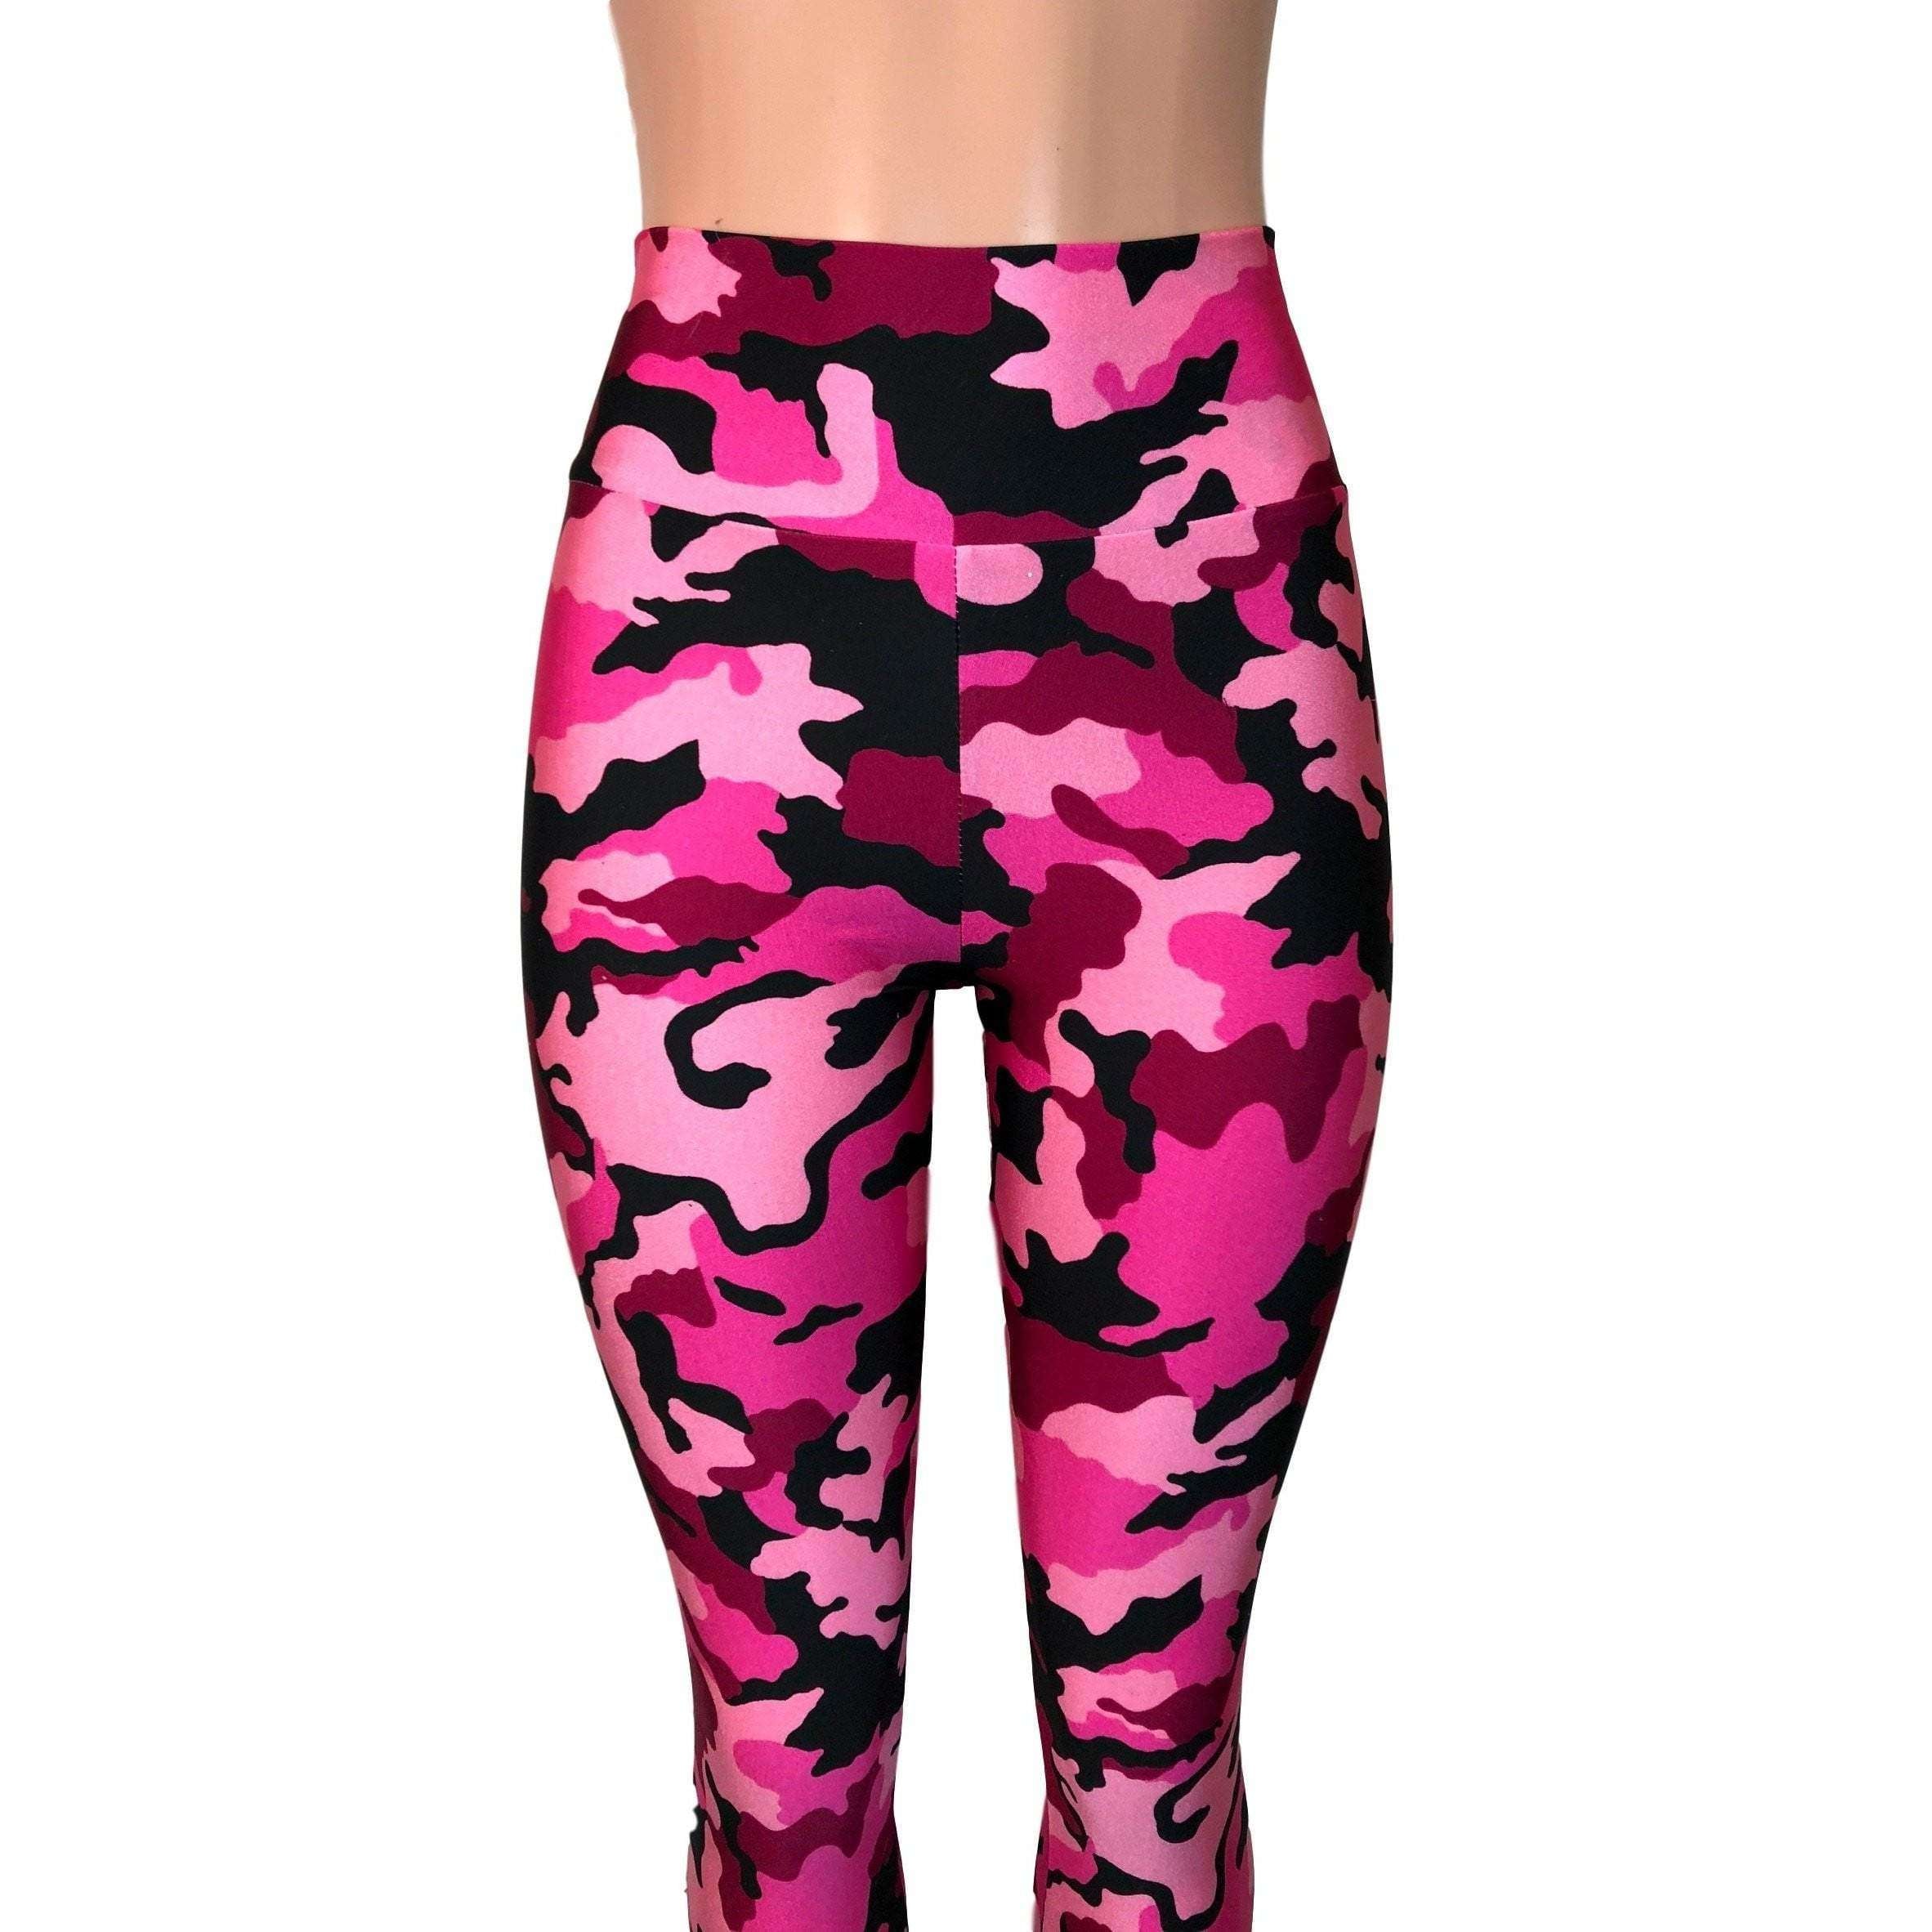 5 Ways to Wear Camo Leggings  Outfit Ideas - Doused in Pink